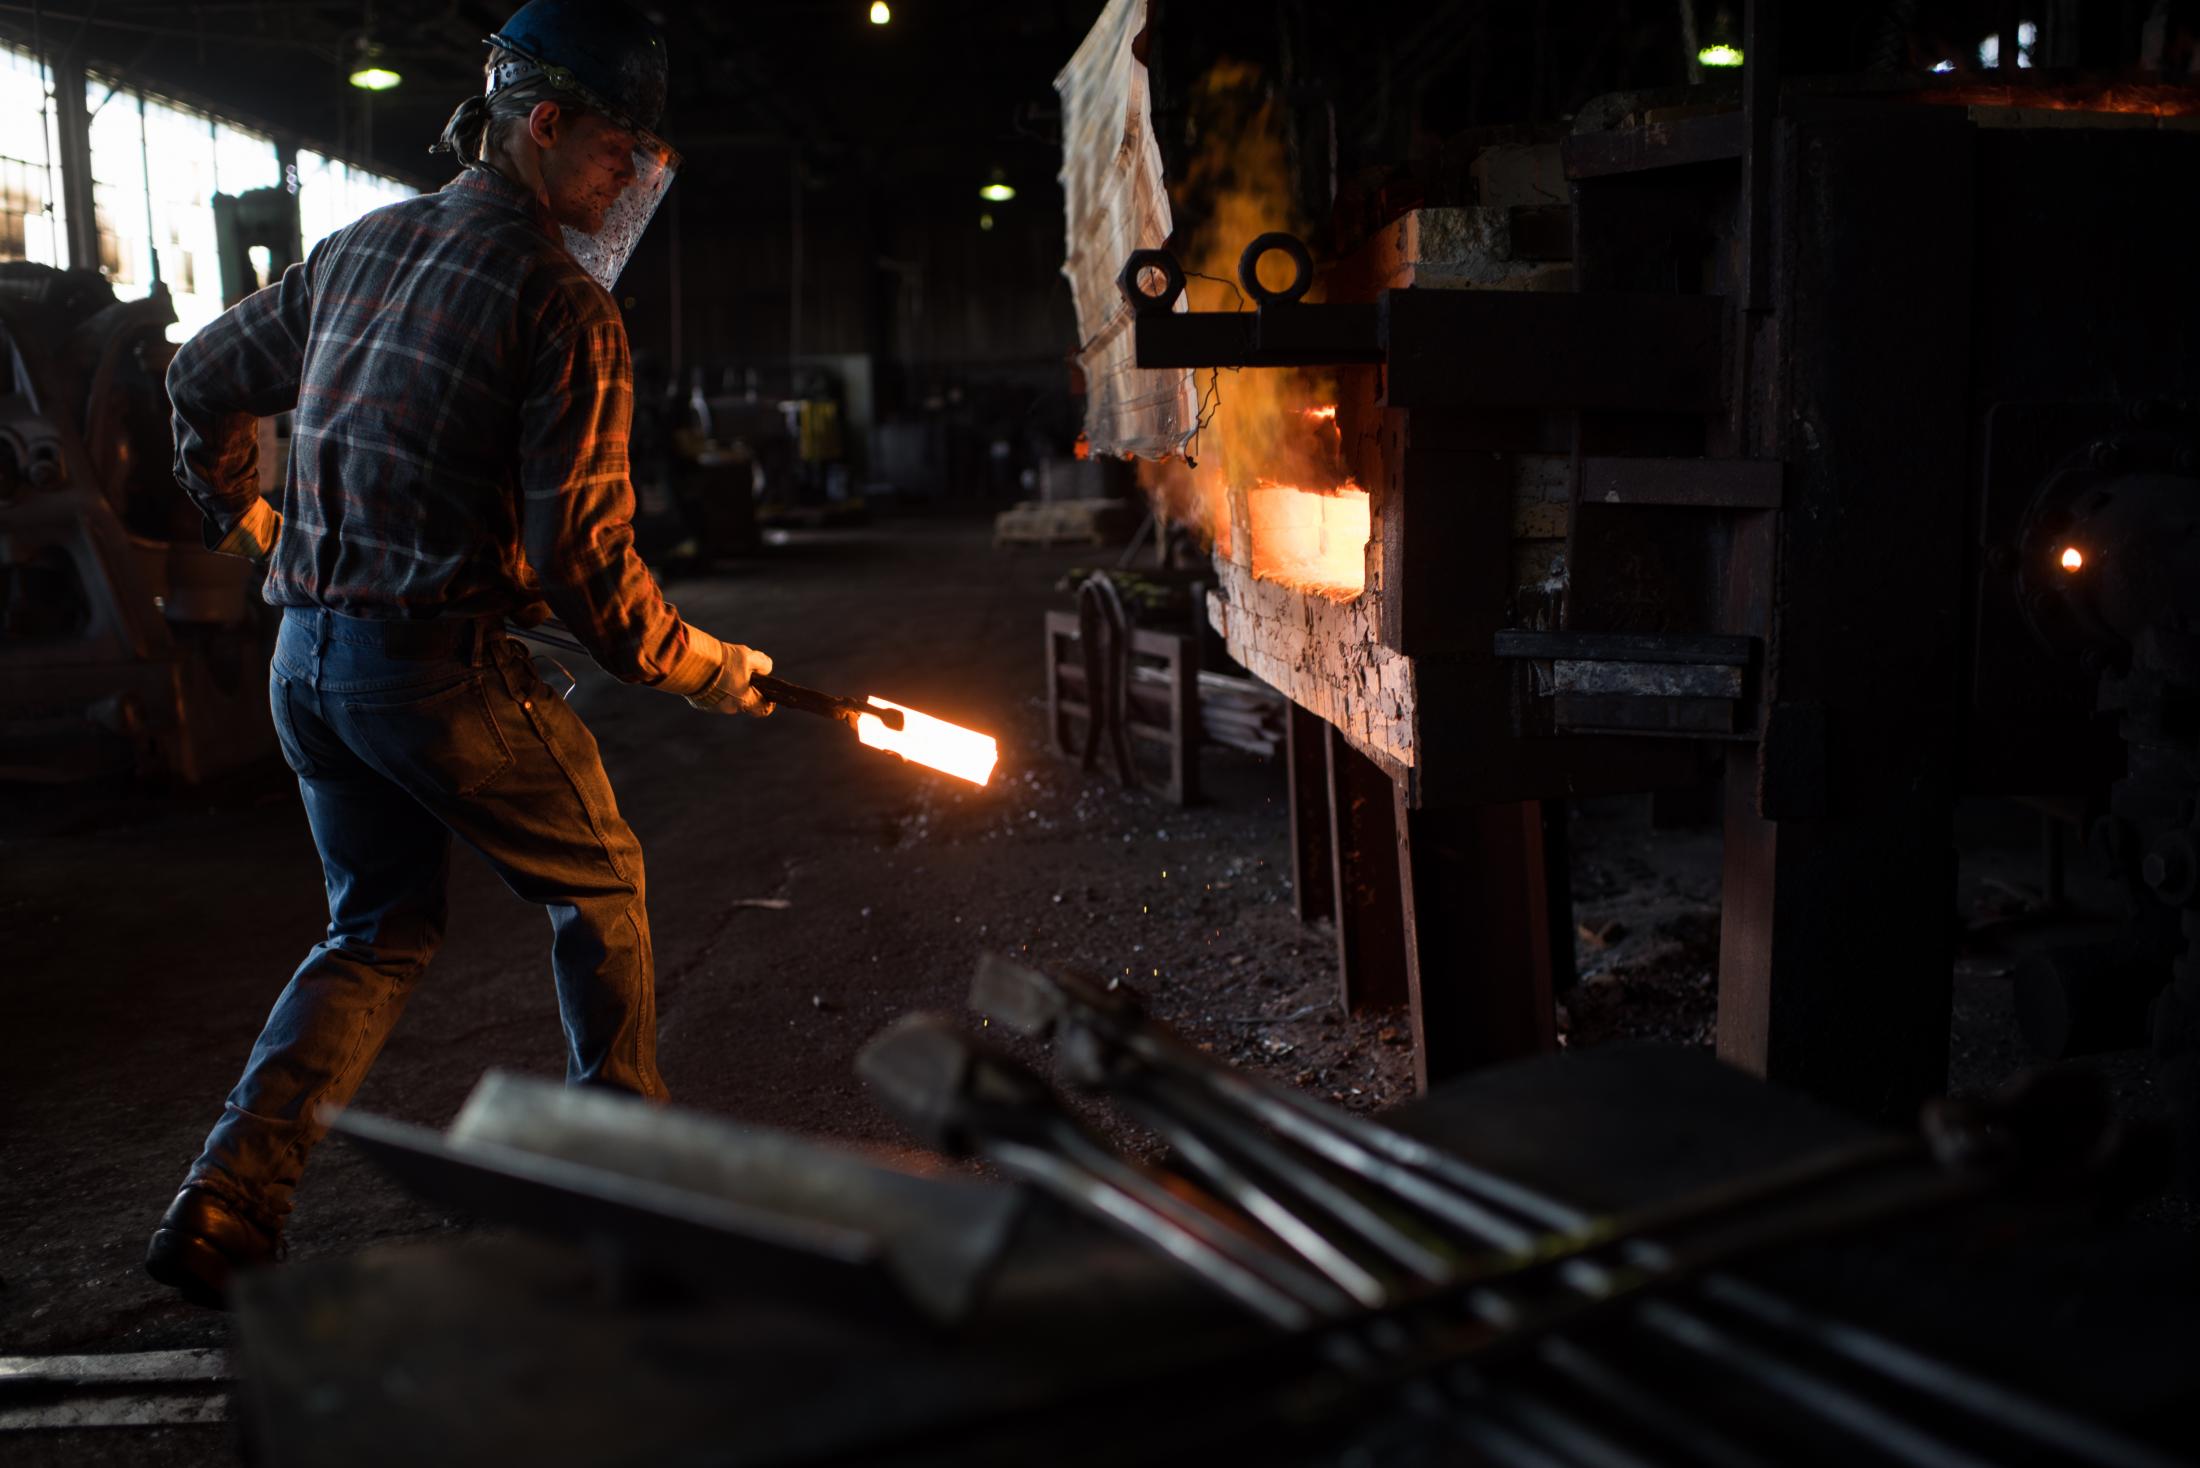 At the Warwood Tool Company, William Davenport&rsquo;s movements appear as a hypnotic dance in the face of the billowing heat of the slot furnace. He pulls a steel billet from a stack, swings toward the waiting furnace and deposits it. Seconds later, after gauging the color&mdash;now white like some celestial object&mdash;he clenches and delivers it to the forging stage. The company&mdash;which was founded in 1854 and supplies tools to the railroad, mining and construction industries&mdash;is one of Wheeling&#39;s few remaining functioning remnants of its significant 19th-century industrial age. Competition from cheaper foreign-made products and the contraction of the steel industry has placed pressure on the company.